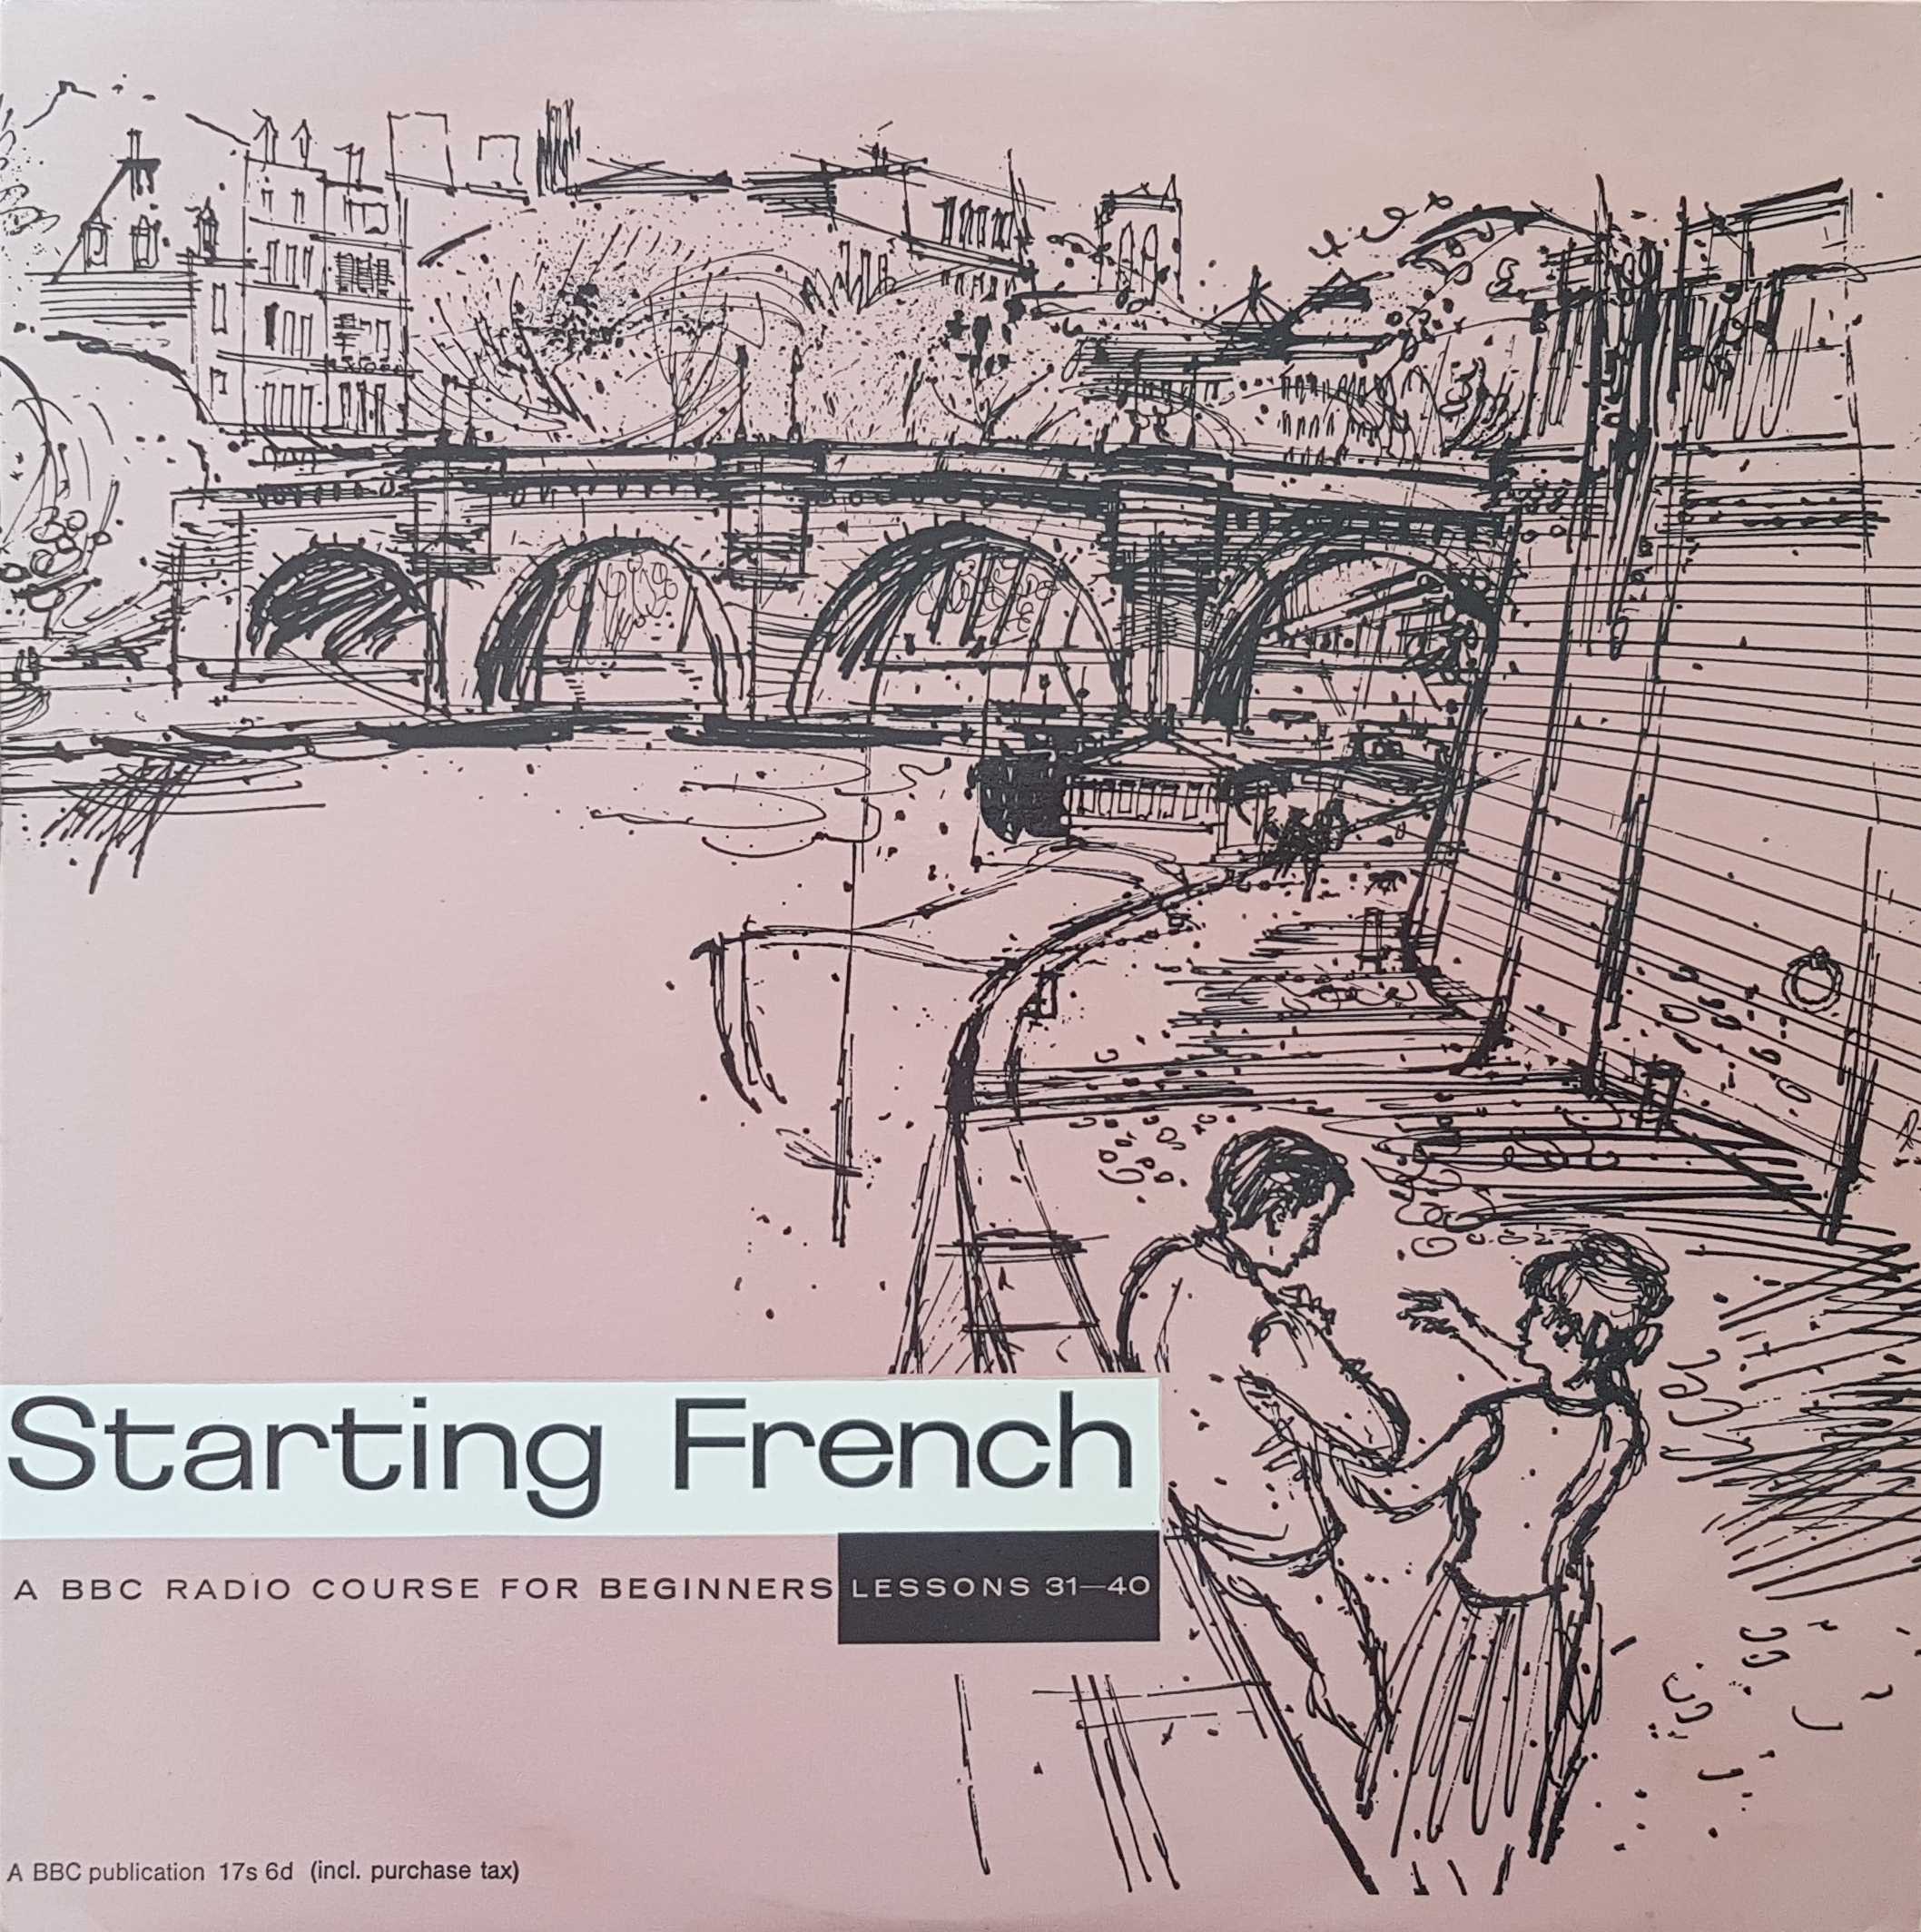 Picture of Starting French - Parts 31 - 40 by artist Elsie Ferguson from the BBC albums - Records and Tapes library